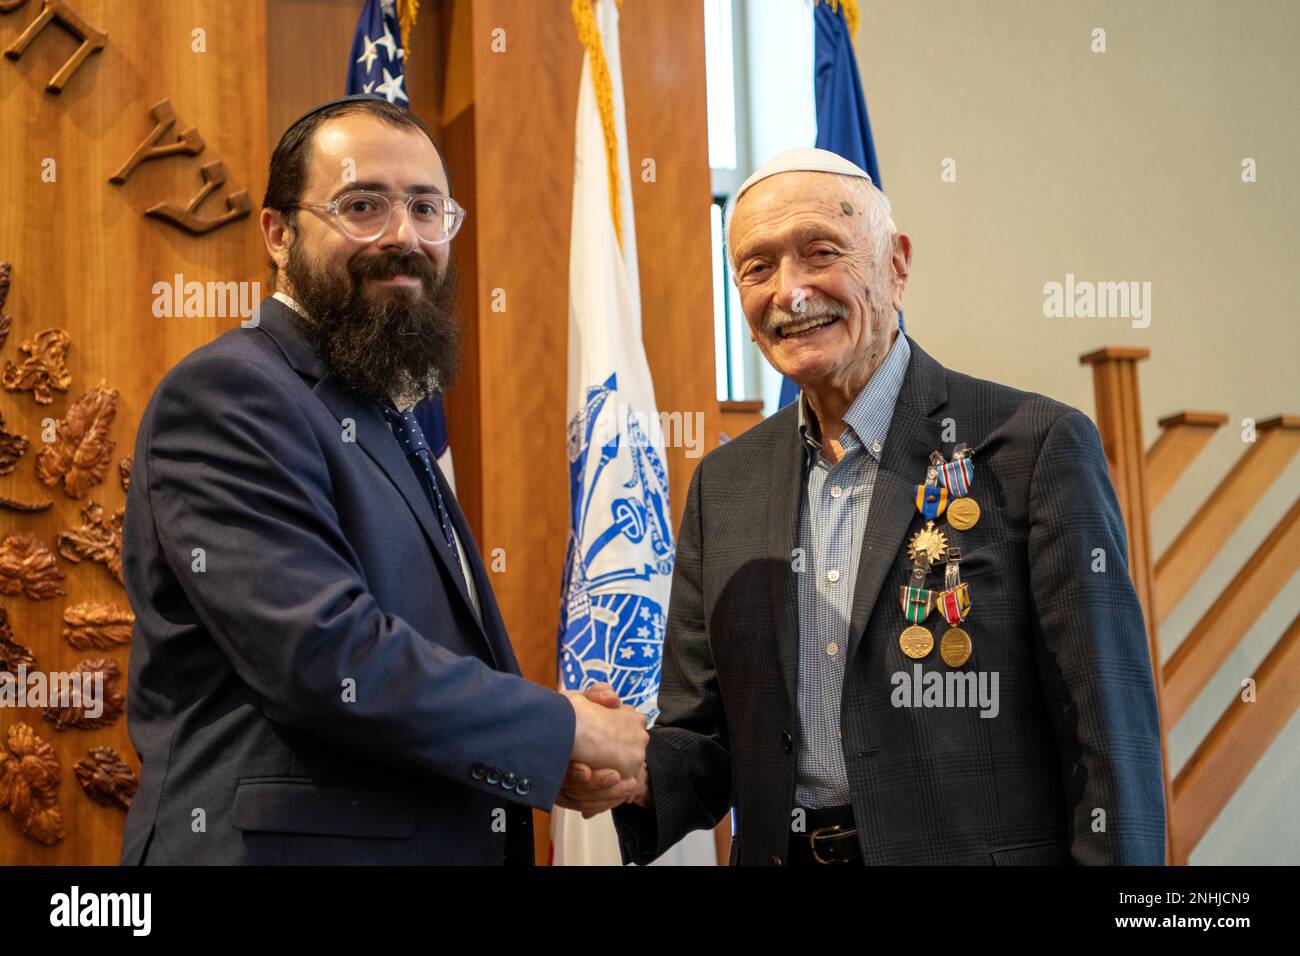 U.S. Army Air Corps 1st Lt. Gerald Teldon (right), retired, receives his award from his grandson, Rabbi Levi Teldon, for his honorable service as a pilot on July 29, 2022, at the Chabad Center for Jewish Life and Learning, San Antonio, Texas. Teldon, born in Bronx, N.Y., in 1924, joined the military in 1944. He completed 62 missions during WWII and the Korean War. Lt. Col. Andrew Stein, 502nd Operations Support Squadron commander, was the presiding officers. The awards presented to Teldon are as follows: the Air Medal; American Campaign Medal; European – African – Middle Eastern Campaign Medal Stock Photo